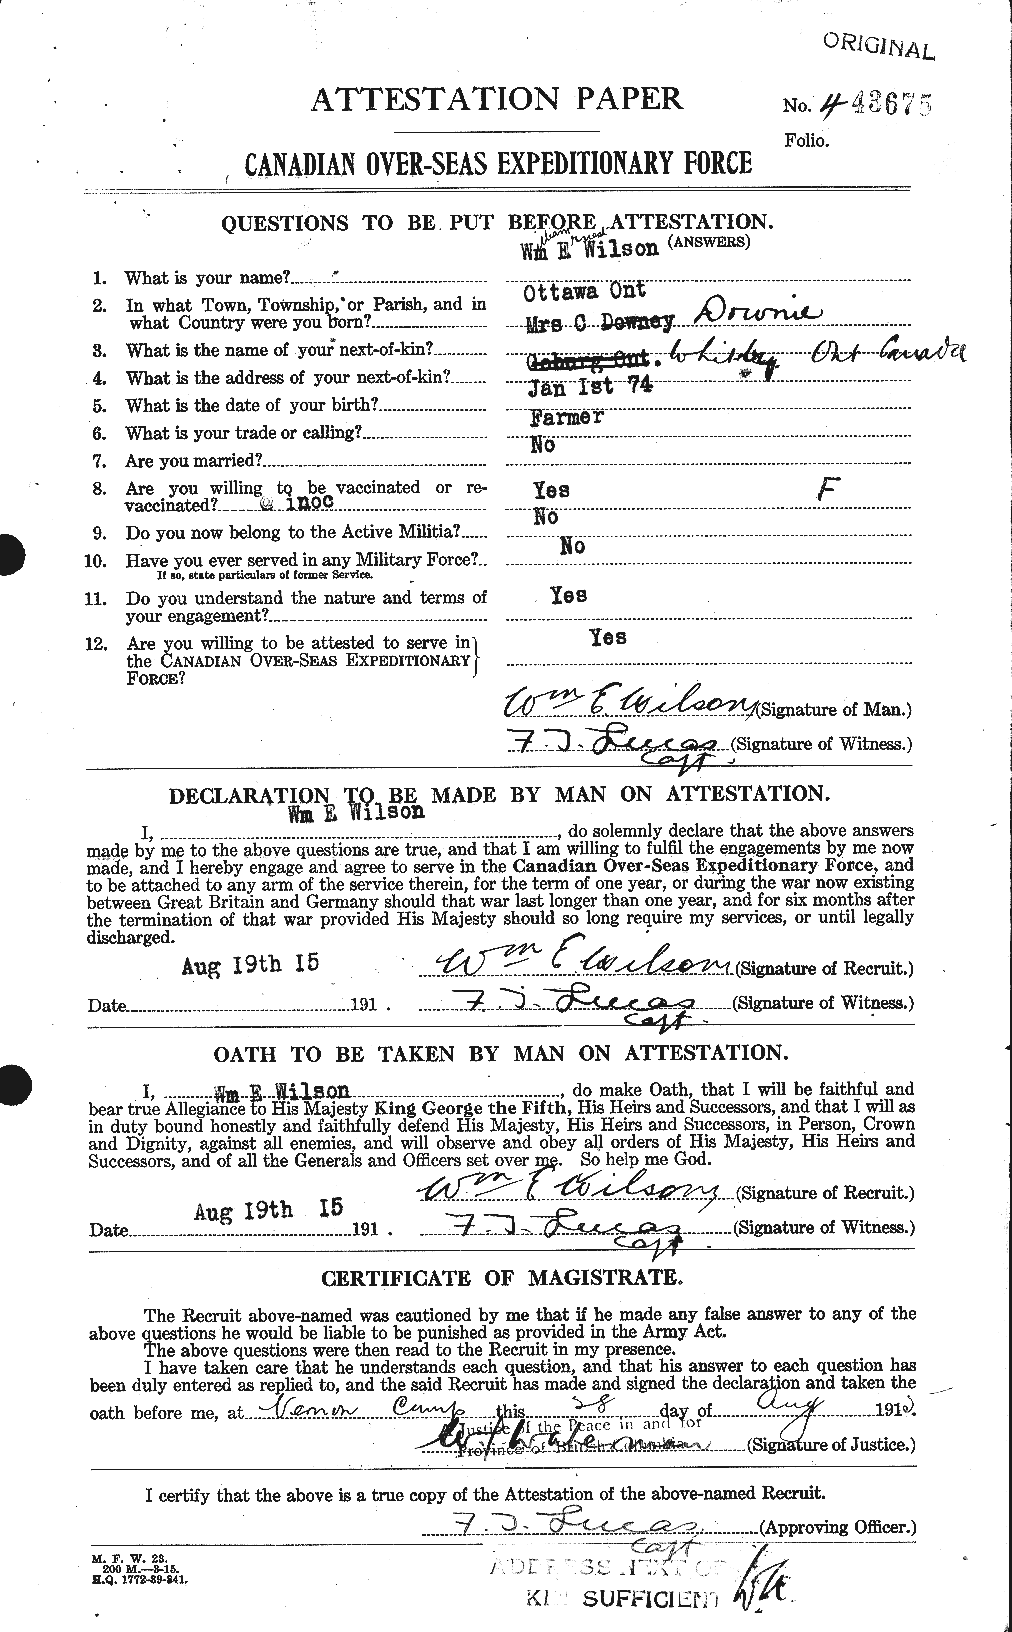 Personnel Records of the First World War - CEF 681984a